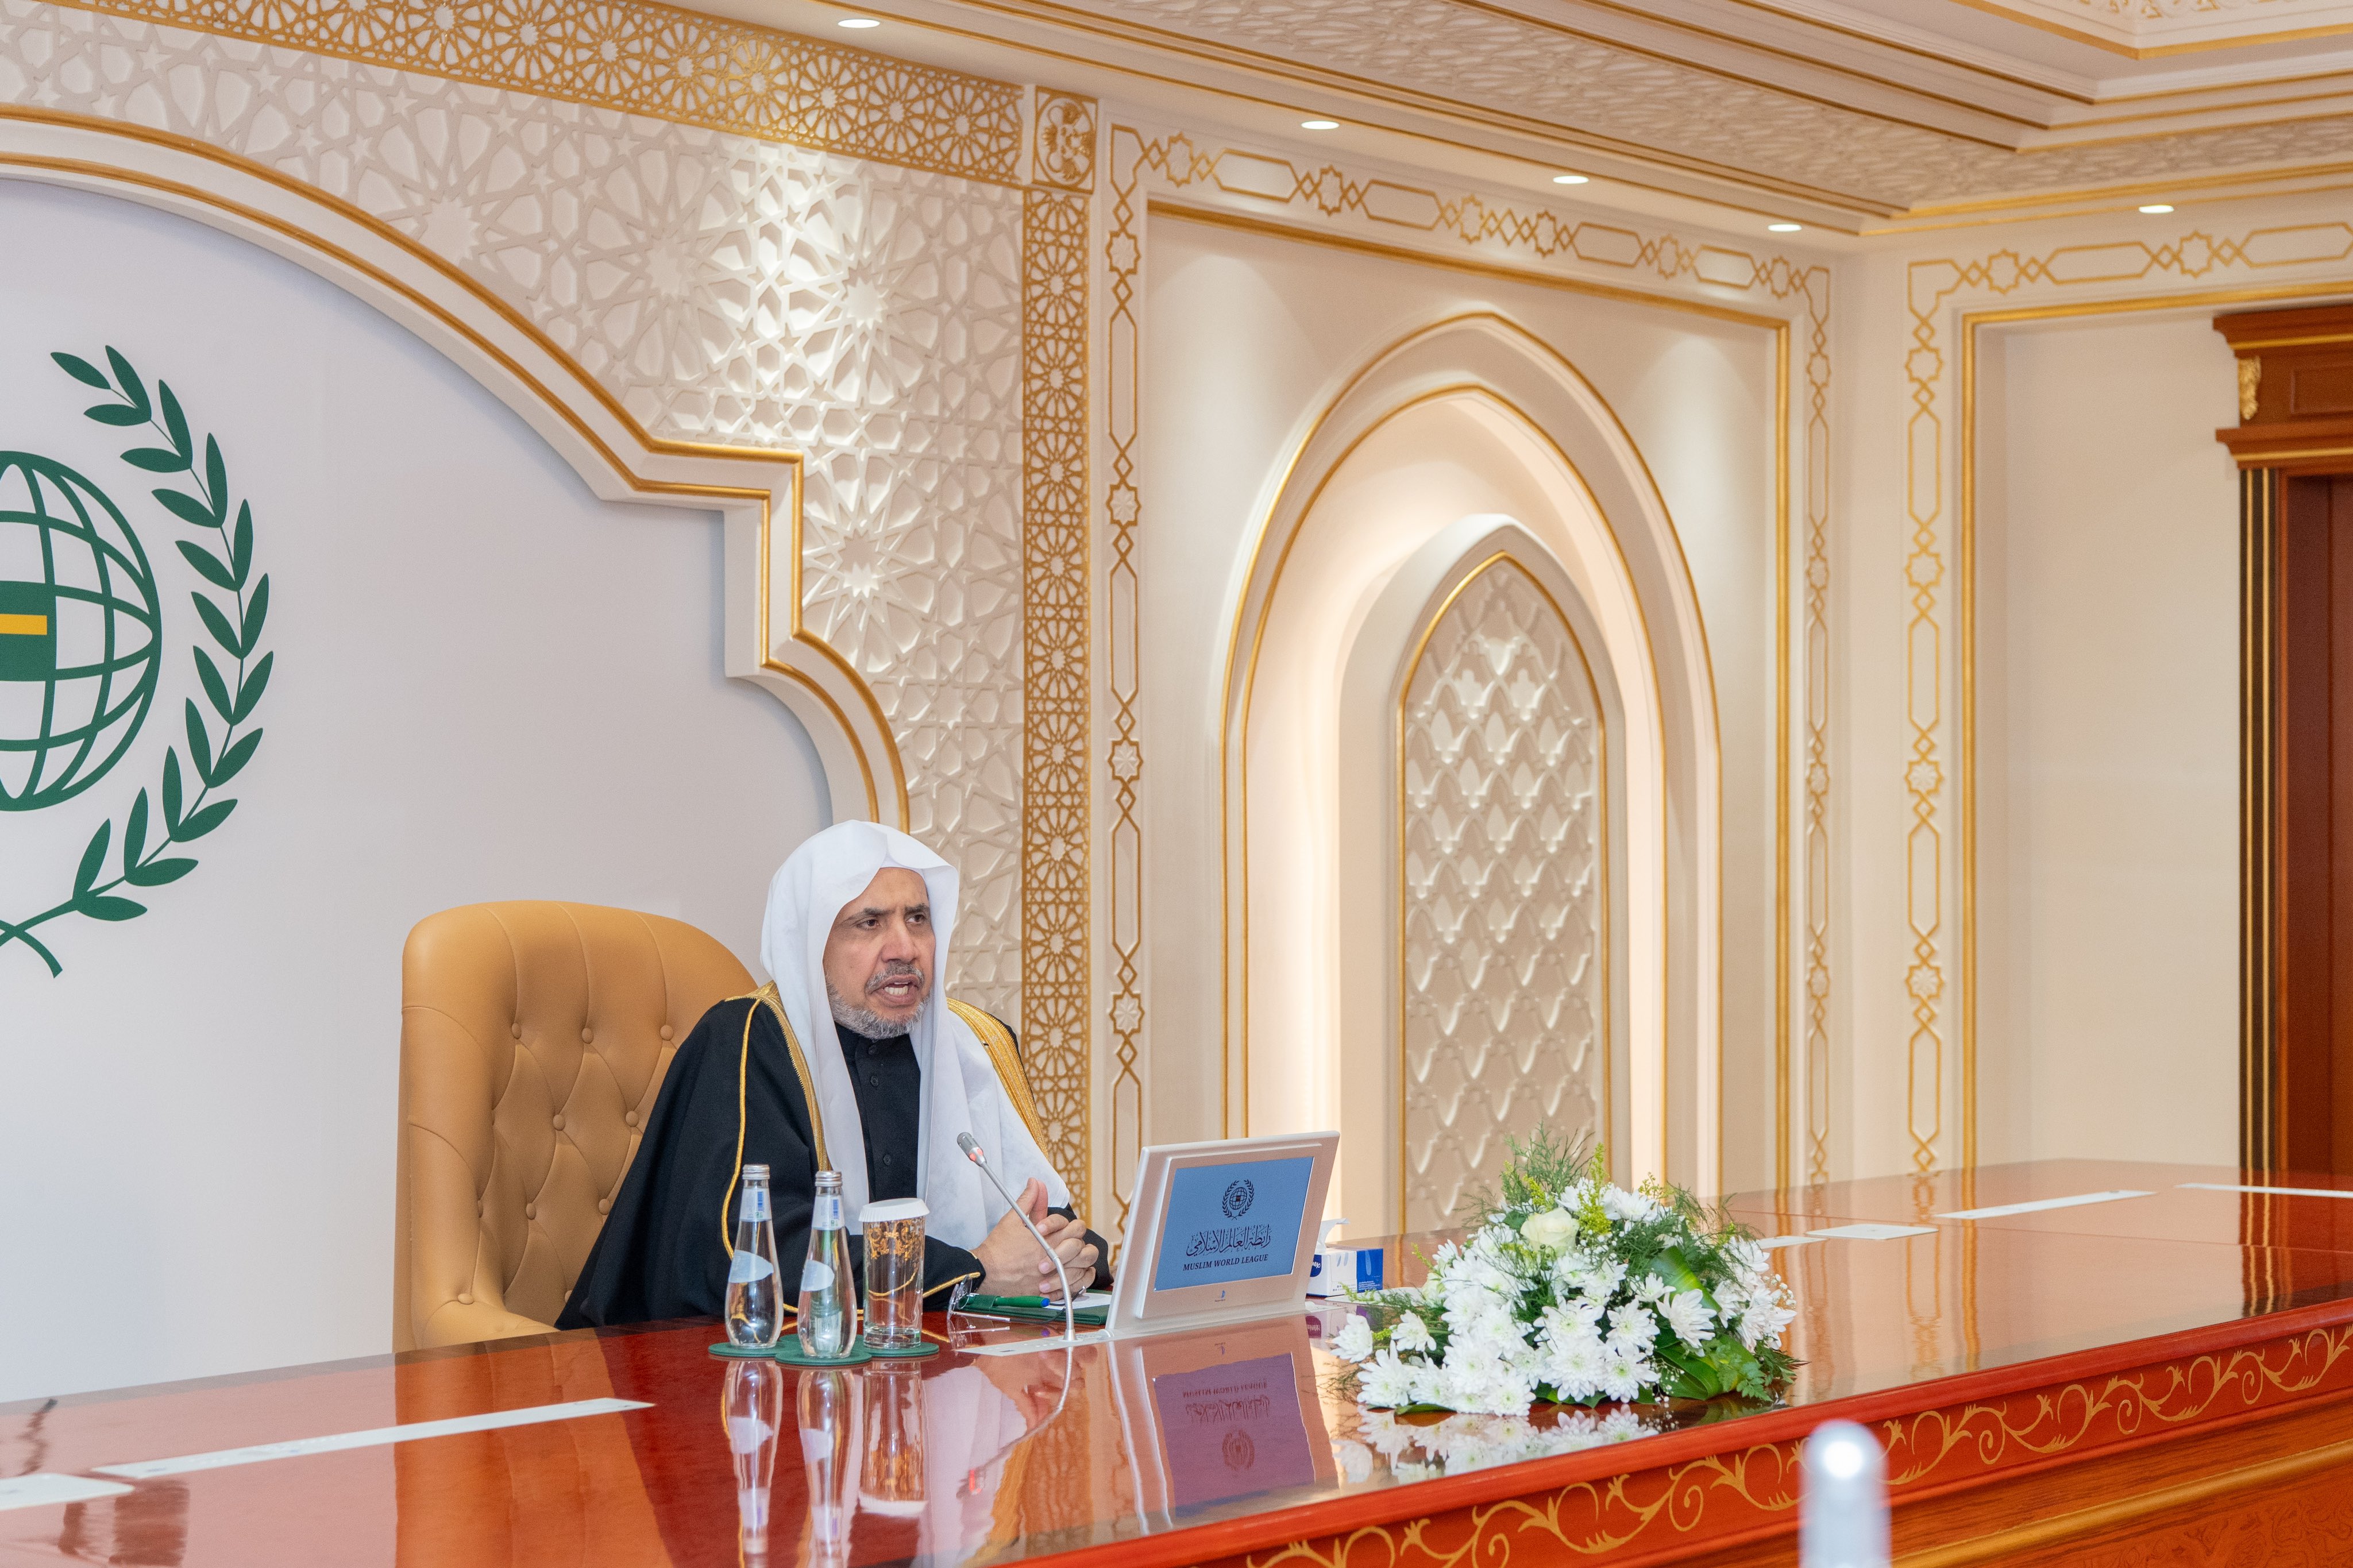 Yesterday at the Muslim World League headquarters in Makkah, His Excellency Sheikh Dr. Mohammad Al-Issa met with the student delegation from Muslim minorities in European universities